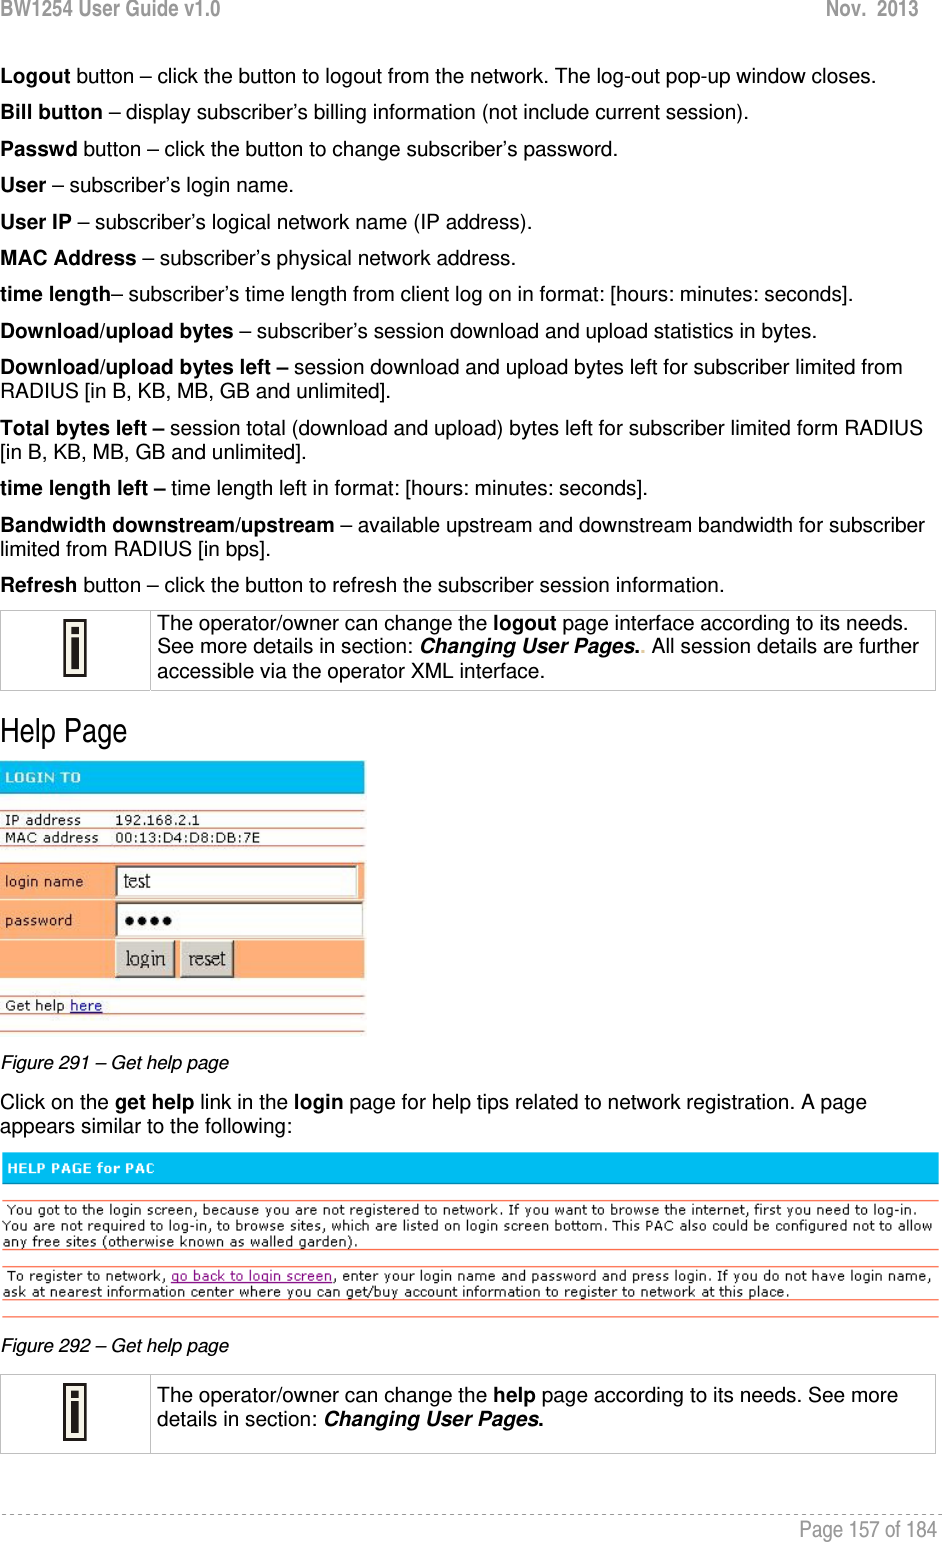 BW1254 User Guide v1.0  Nov.  2013     Page 157 of 184   Logout button – click the button to logout from the network. The log-out pop-up window closes. Bill button – display subscriber’s billing information (not include current session). Passwd button – click the button to change subscriber’s password. User – subscriber’s login name. User IP – subscriber’s logical network name (IP address). MAC Address – subscriber’s physical network address. time length– subscriber’s time length from client log on in format: [hours: minutes: seconds]. Download/upload bytes – subscriber’s session download and upload statistics in bytes. Download/upload bytes left – session download and upload bytes left for subscriber limited from RADIUS [in B, KB, MB, GB and unlimited]. Total bytes left – session total (download and upload) bytes left for subscriber limited form RADIUS [in B, KB, MB, GB and unlimited]. time length left – time length left in format: [hours: minutes: seconds]. Bandwidth downstream/upstream – available upstream and downstream bandwidth for subscriber limited from RADIUS [in bps]. Refresh button – click the button to refresh the subscriber session information.  The operator/owner can change the logout page interface according to its needs. See more details in section: Changing User Pages.. All session details are further accessible via the operator XML interface. Help Page  Figure 291 – Get help page Click on the get help link in the login page for help tips related to network registration. A page appears similar to the following:  Figure 292 – Get help page  The operator/owner can change the help page according to its needs. See more details in section: Changing User Pages.  